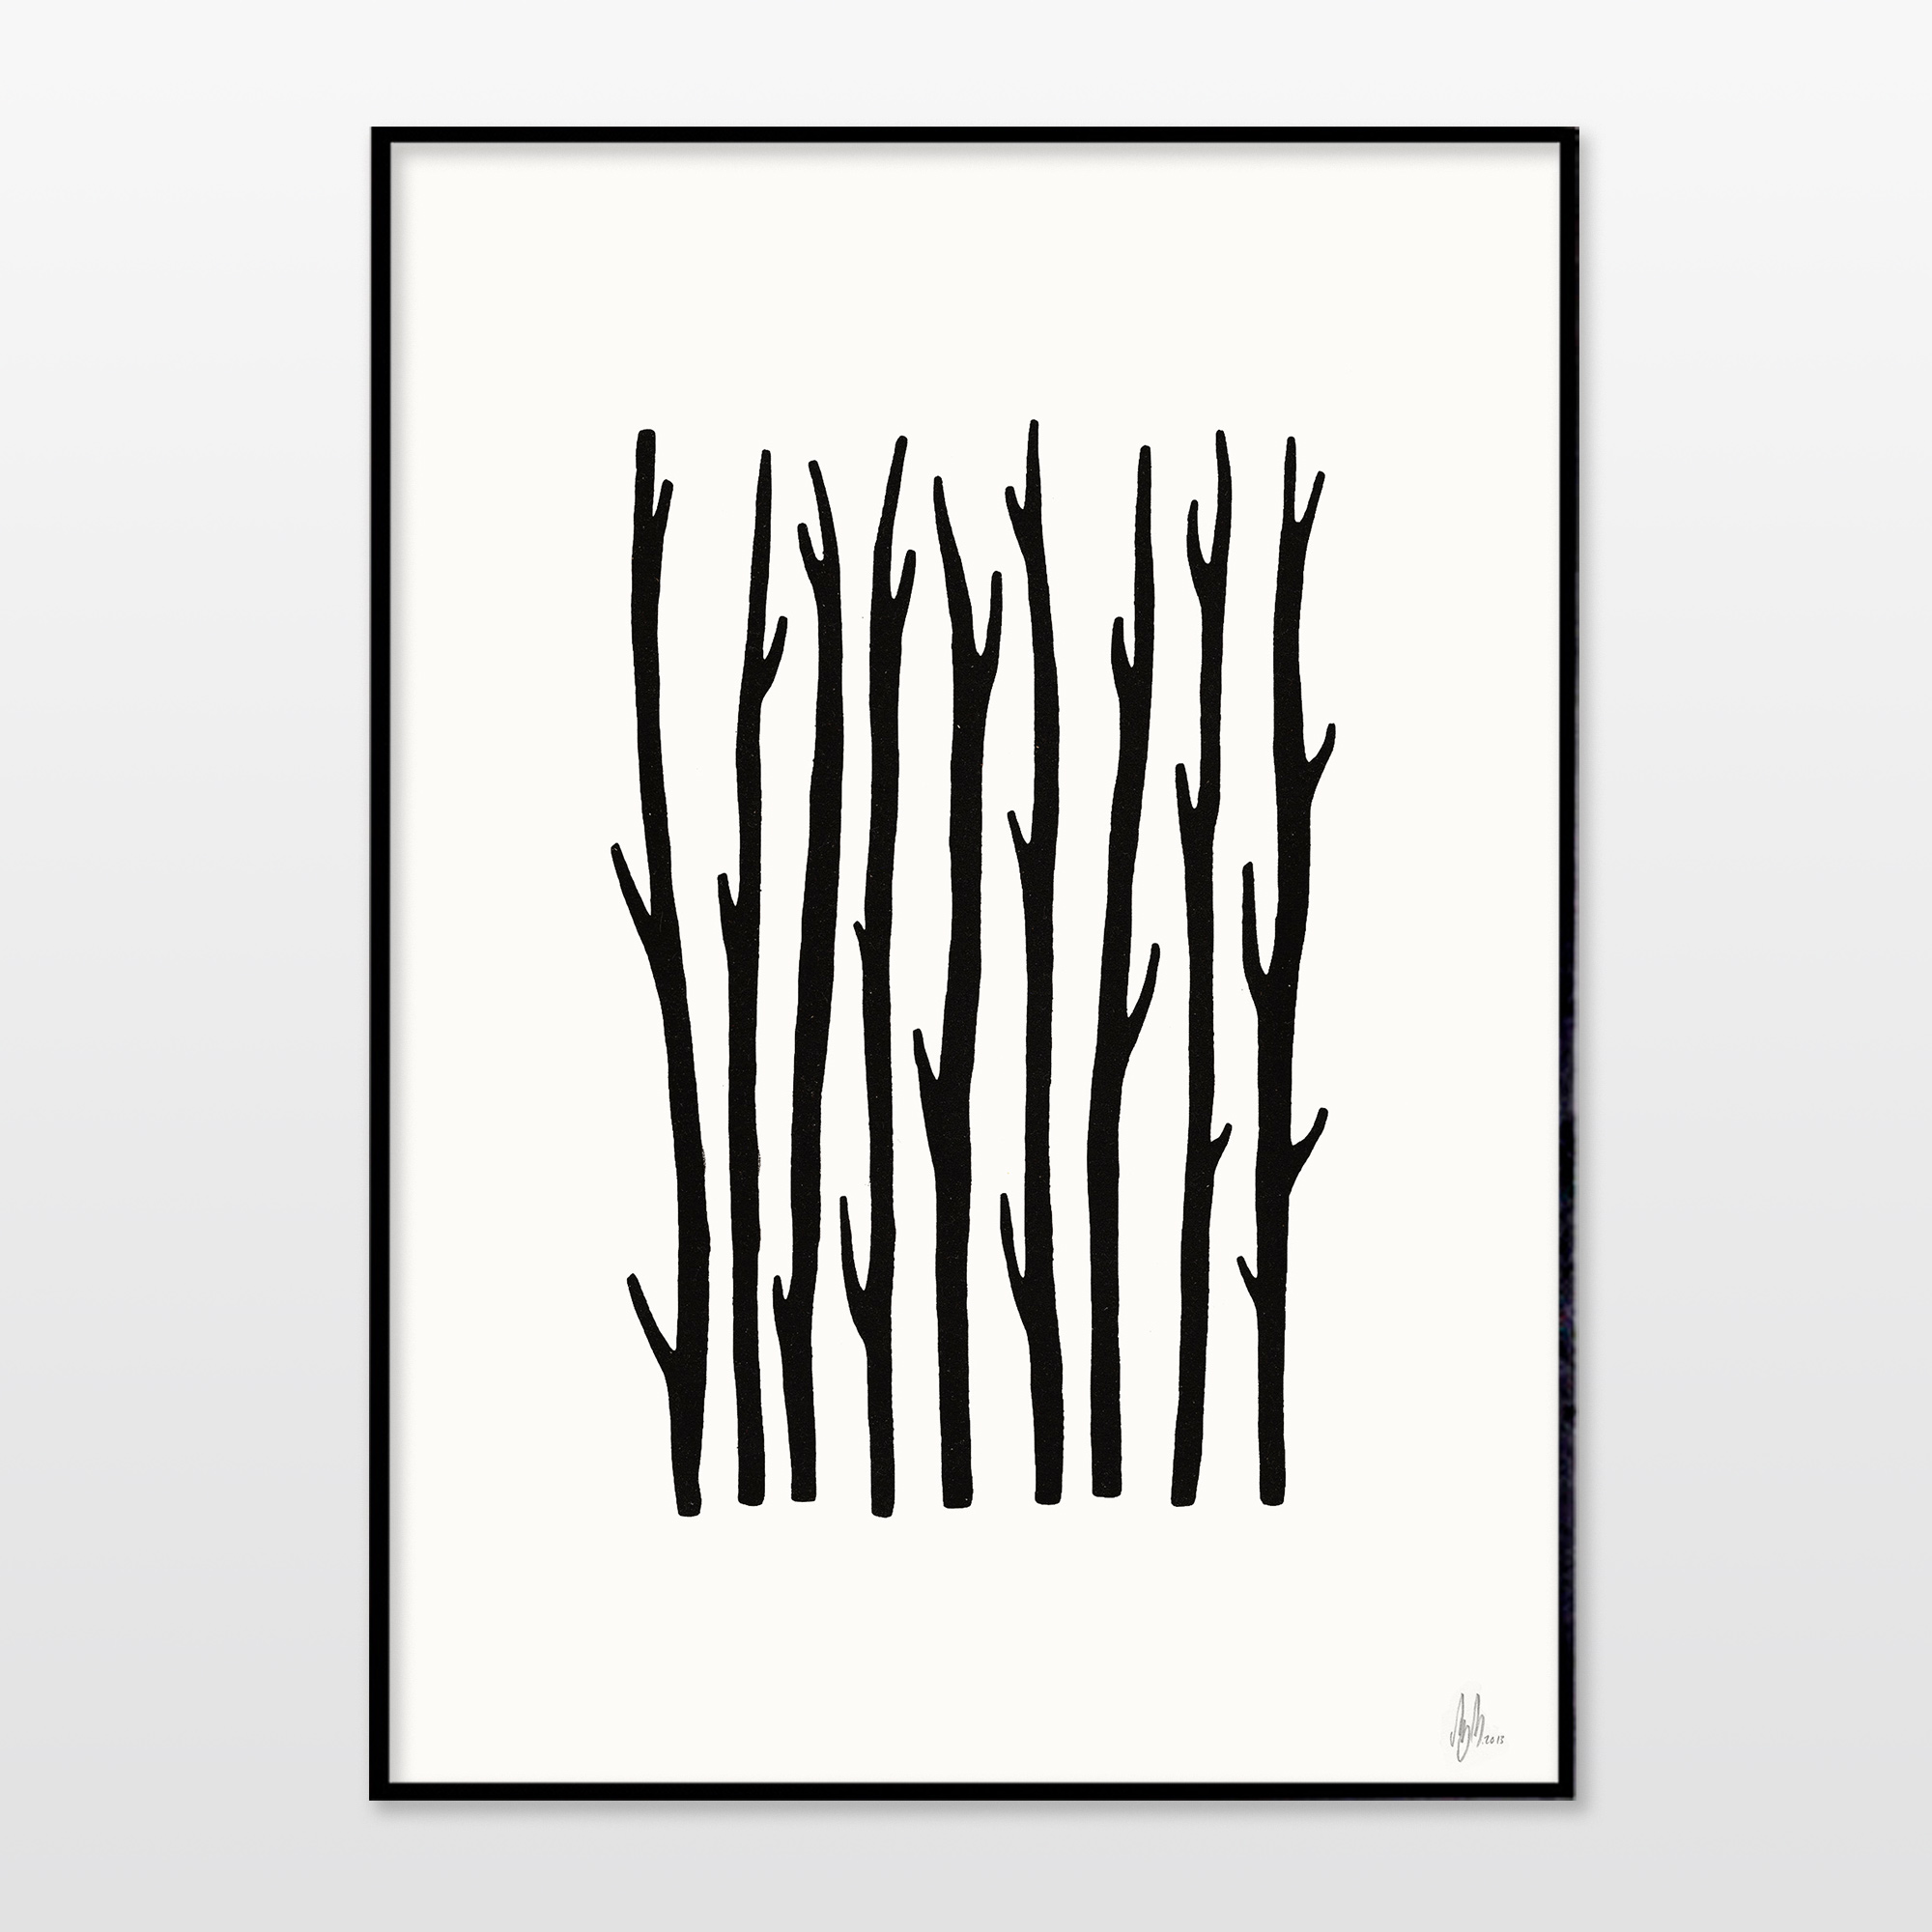 posters-prints, giclee-print, family-friendly, figurative, illustrative, minimalistic, botany, nature, black, white, ink, paper, amusing, copenhagen, cute, danish, decorative, design, interior, interior-design, modern, modern-art, nordic, posters, prints, scandinavien, Buy original high quality art. Paintings, drawings, limited edition prints & posters by talented artists.